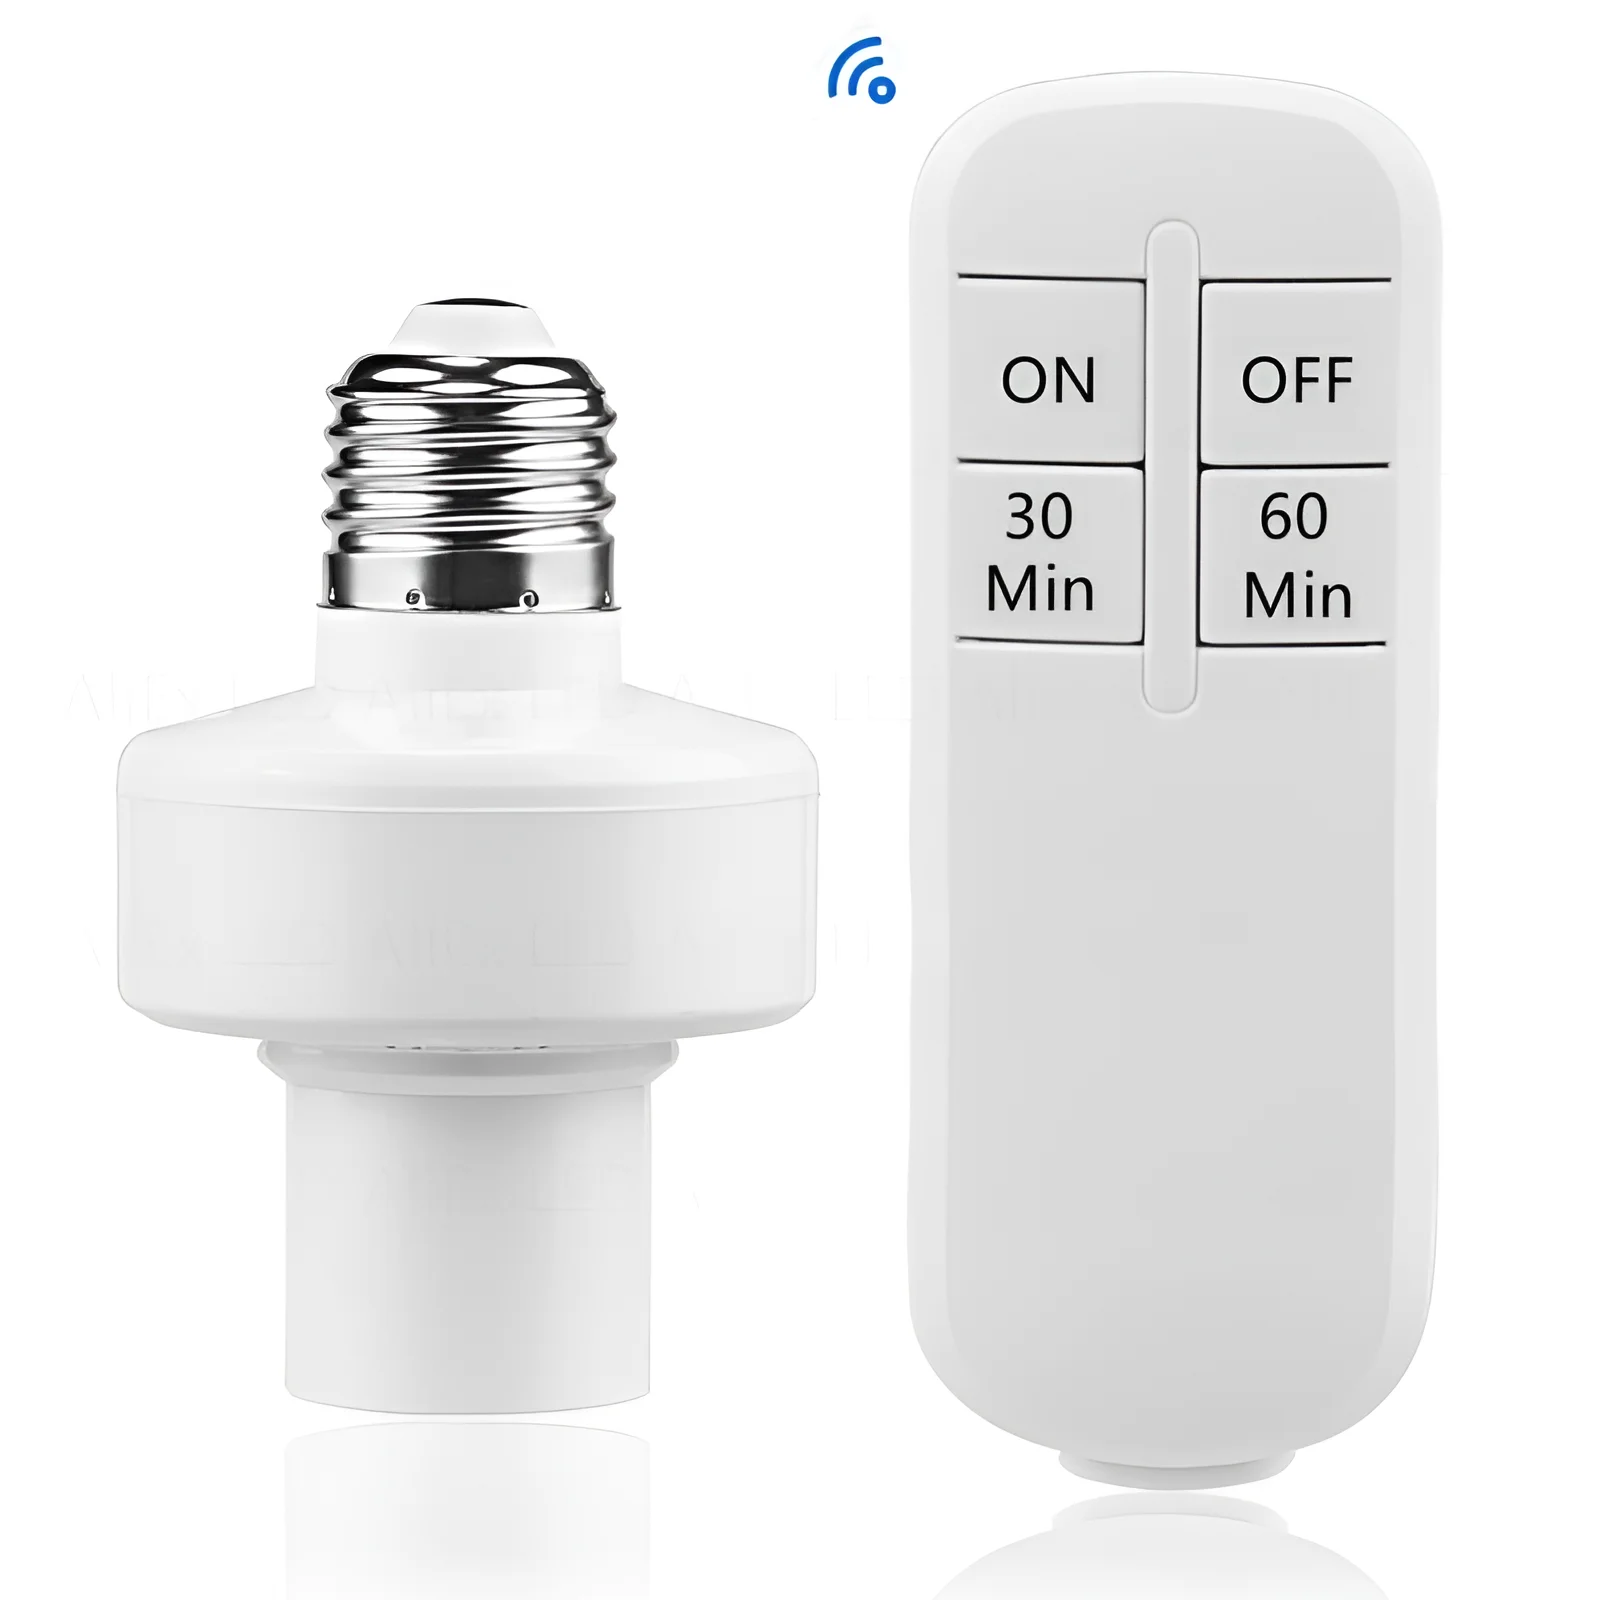 https://ae01.alicdn.com/kf/S39e5199b7a8b4ae1b4ad16dd0ab775b3Y/E27-lamp-holder-wireless-remote-control-with-60min-30min-E27-110V-220V-power-switch-socket-remote.png